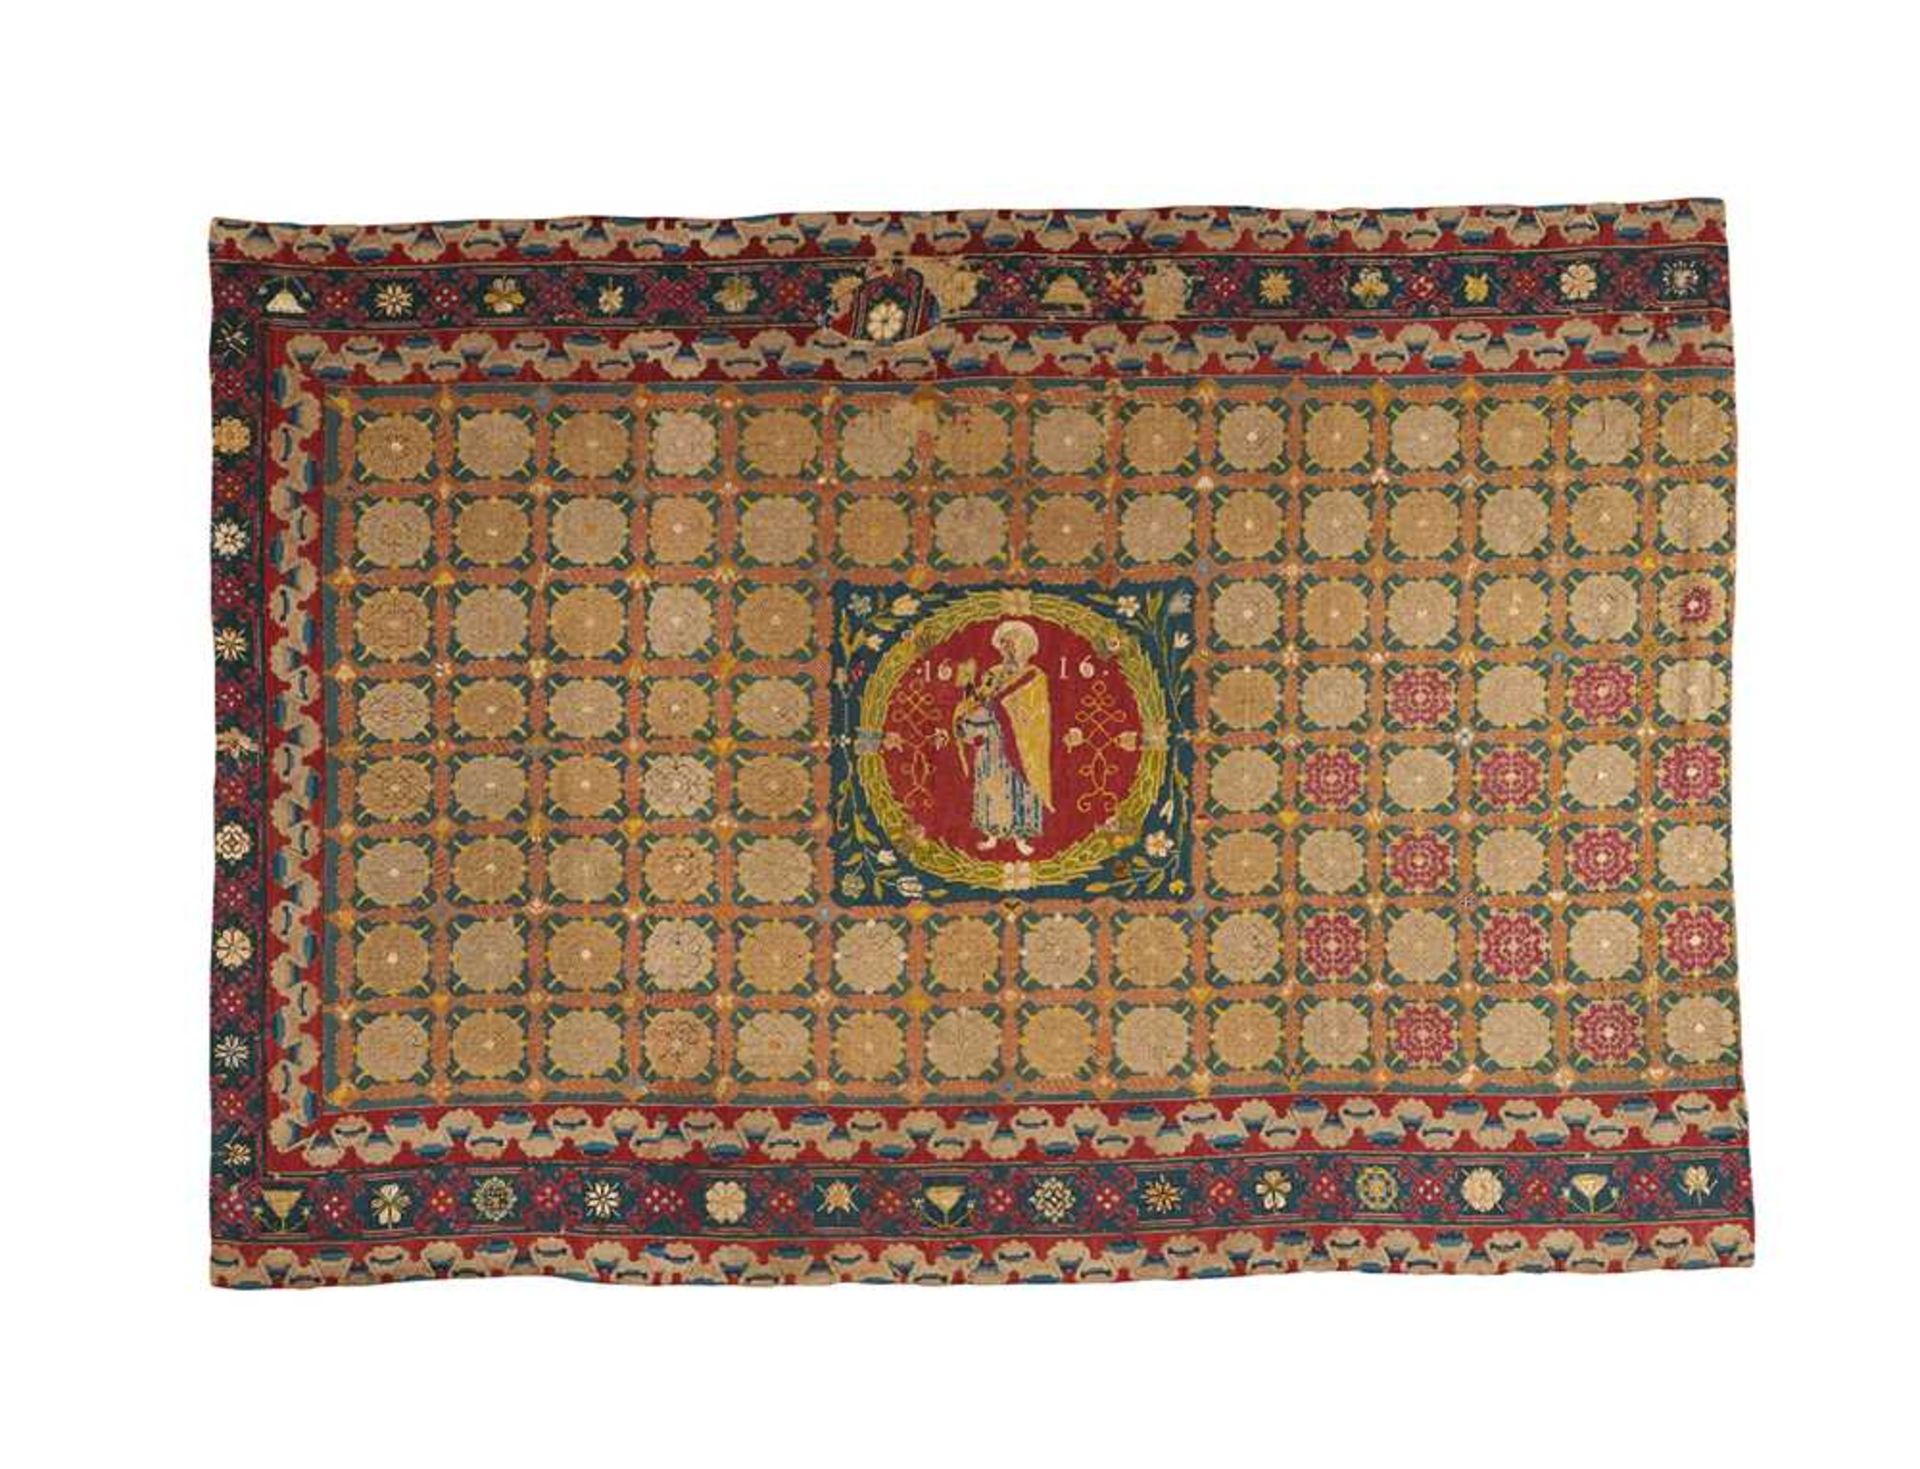 ENGLISH WOOL AND PART SILK NEEDLEWORK CARPET SECTION DATED 1616